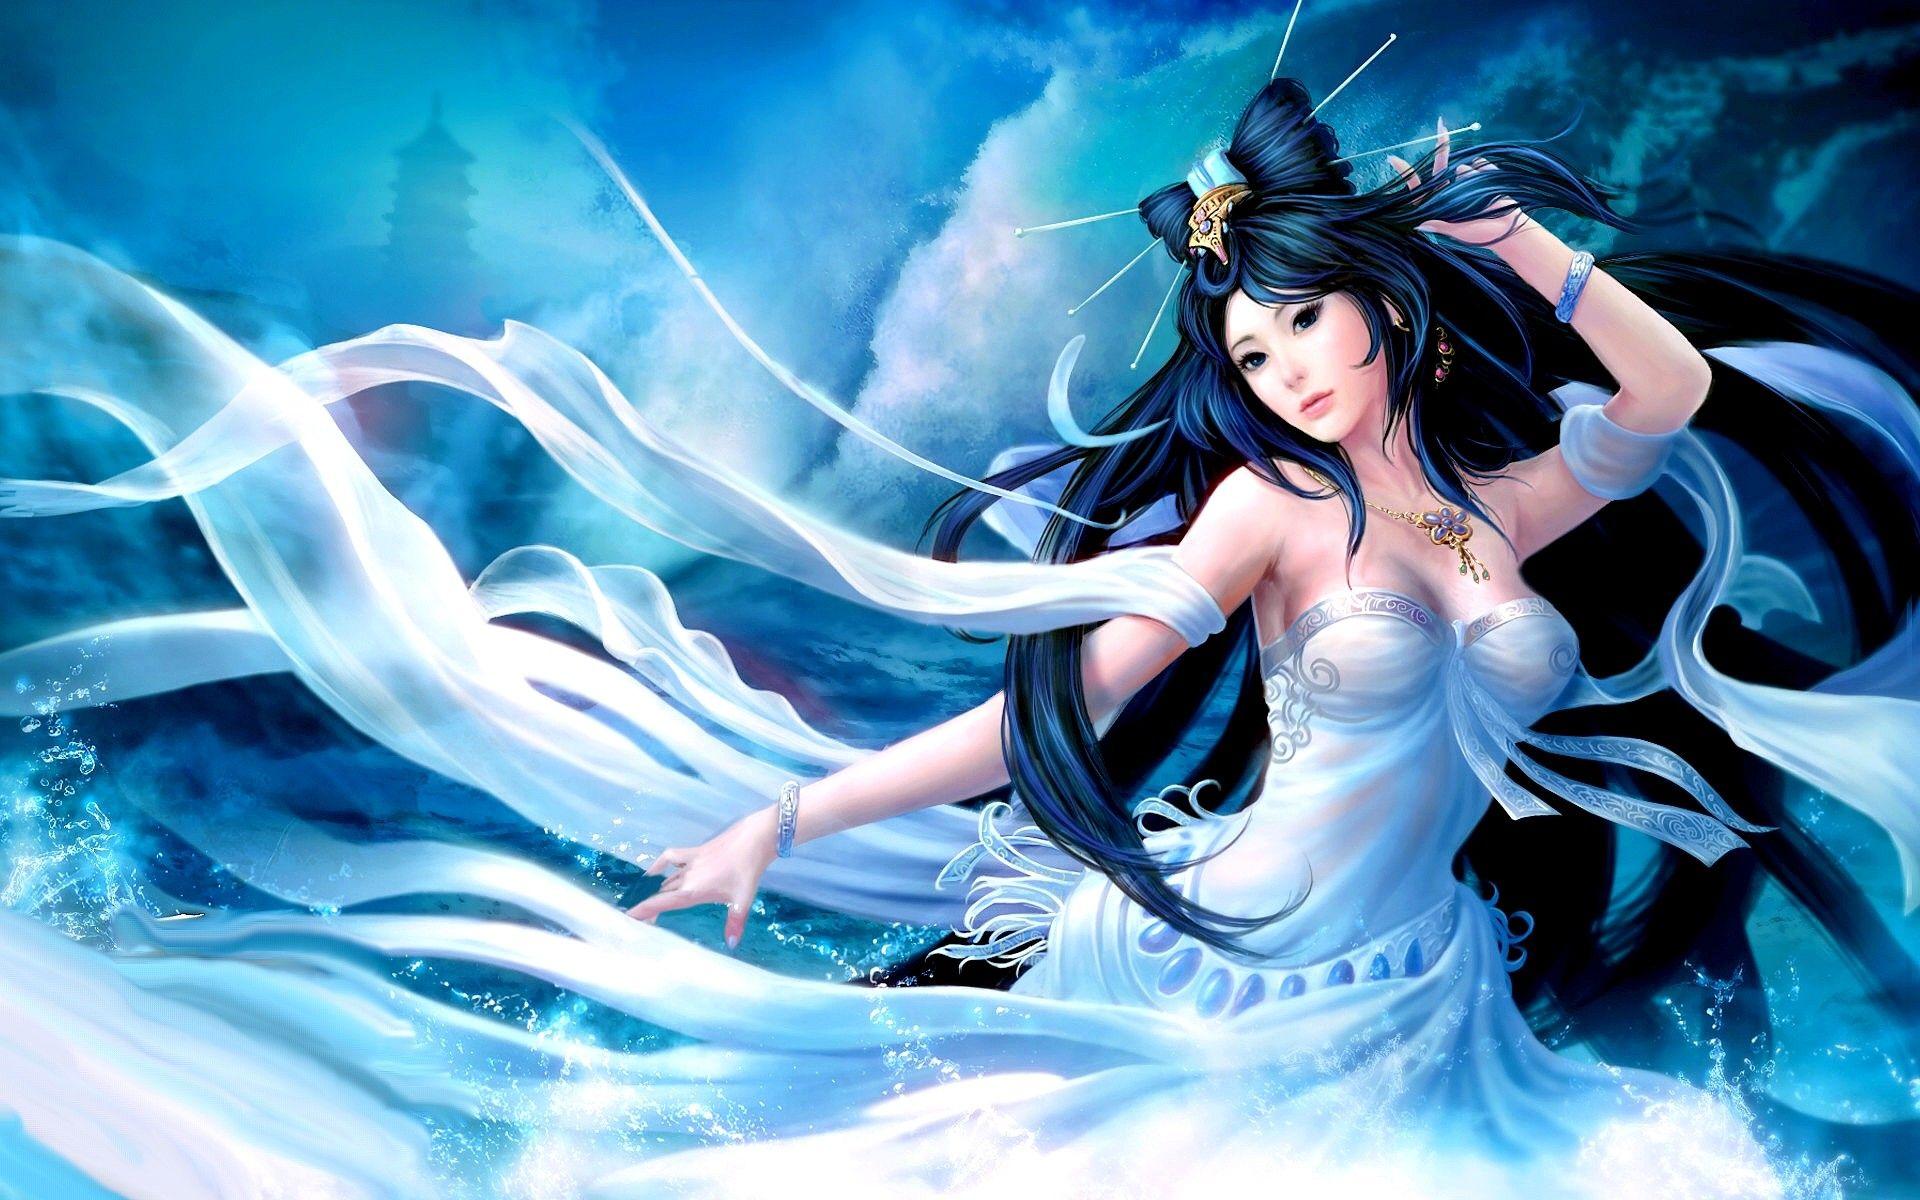 Beautiful Chinese Anime GirlWallpapers